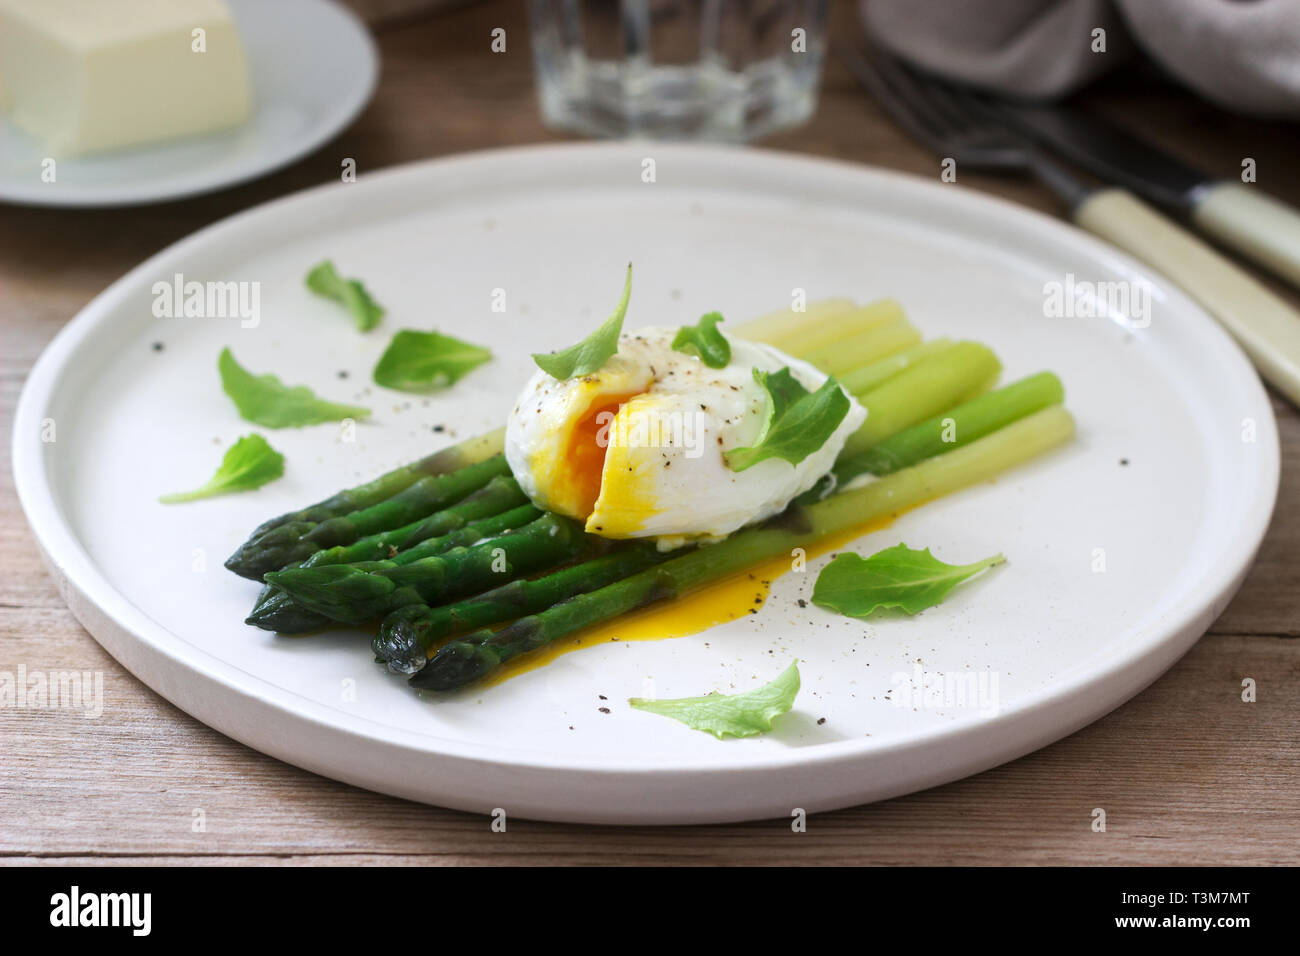 Breakfast consisting of poached egg and boiled asparagus with butter and lettuce on a wooden surface. Rustic style. Stock Photo